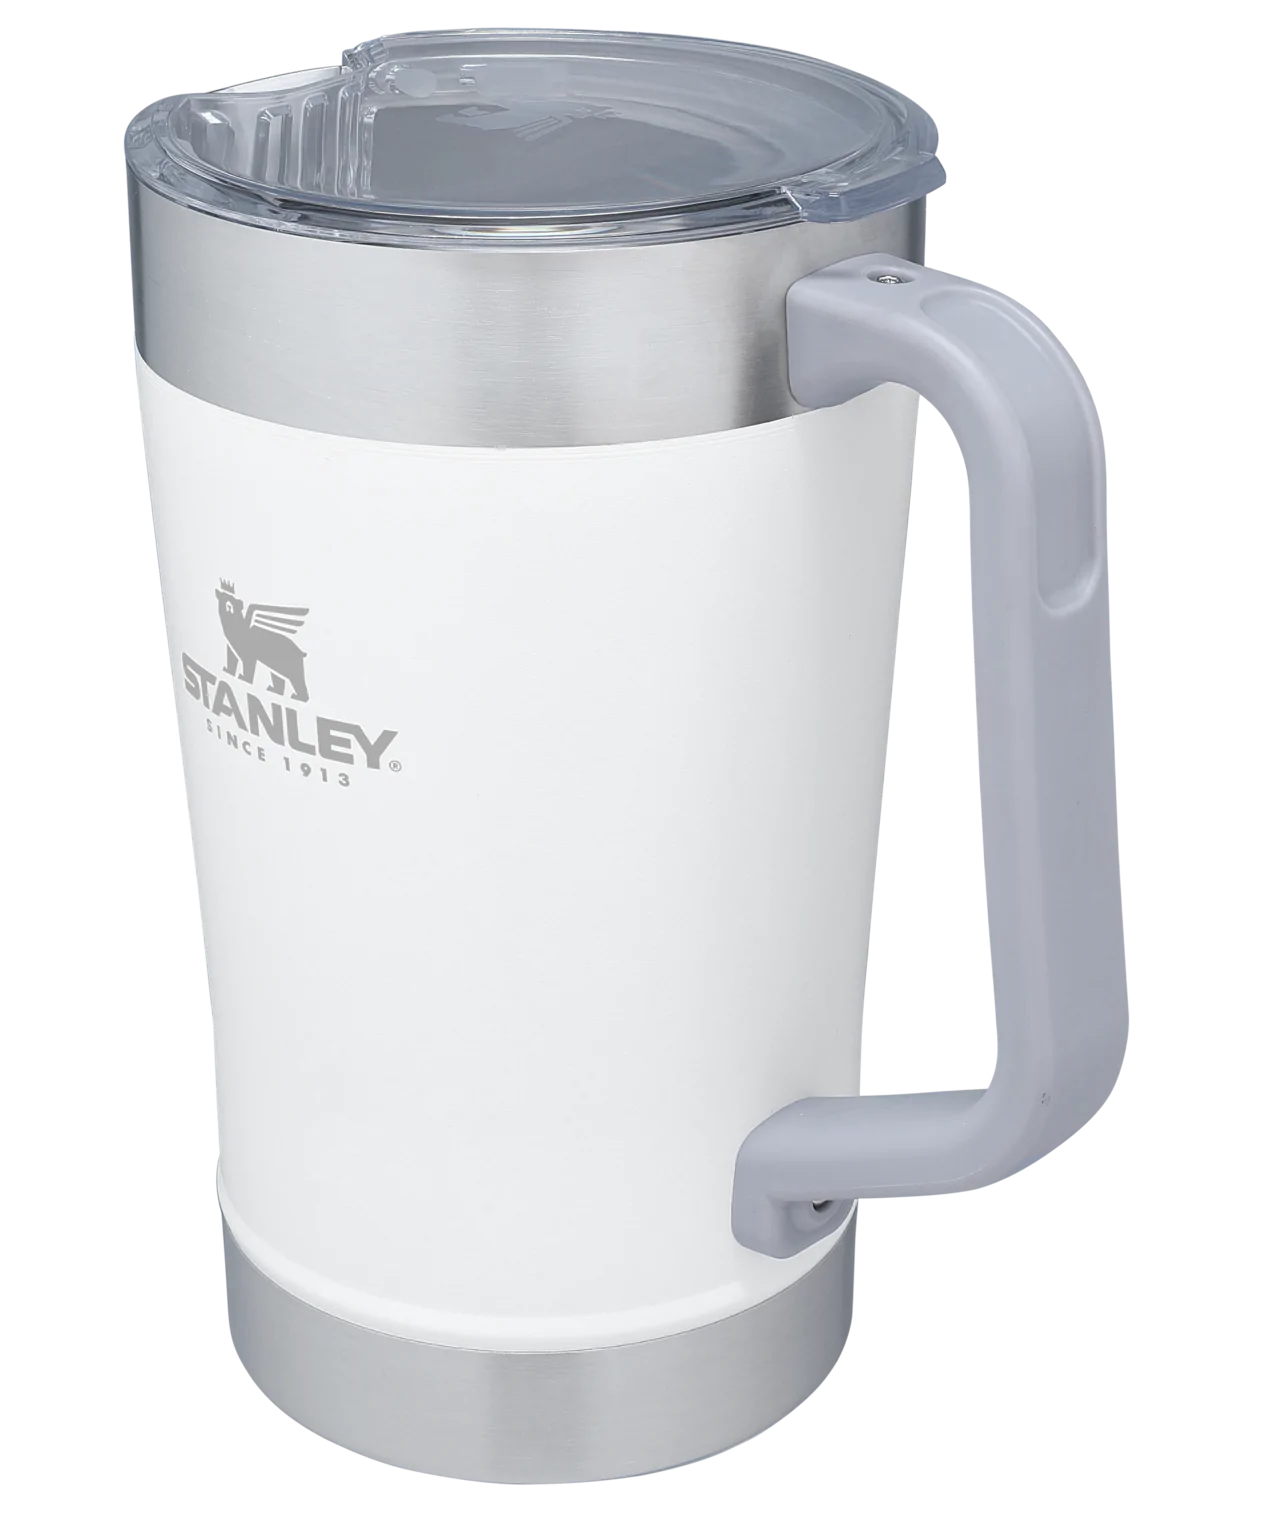 Stanley The Stay-Chill Classic Pitcher Set, Hammertone Green